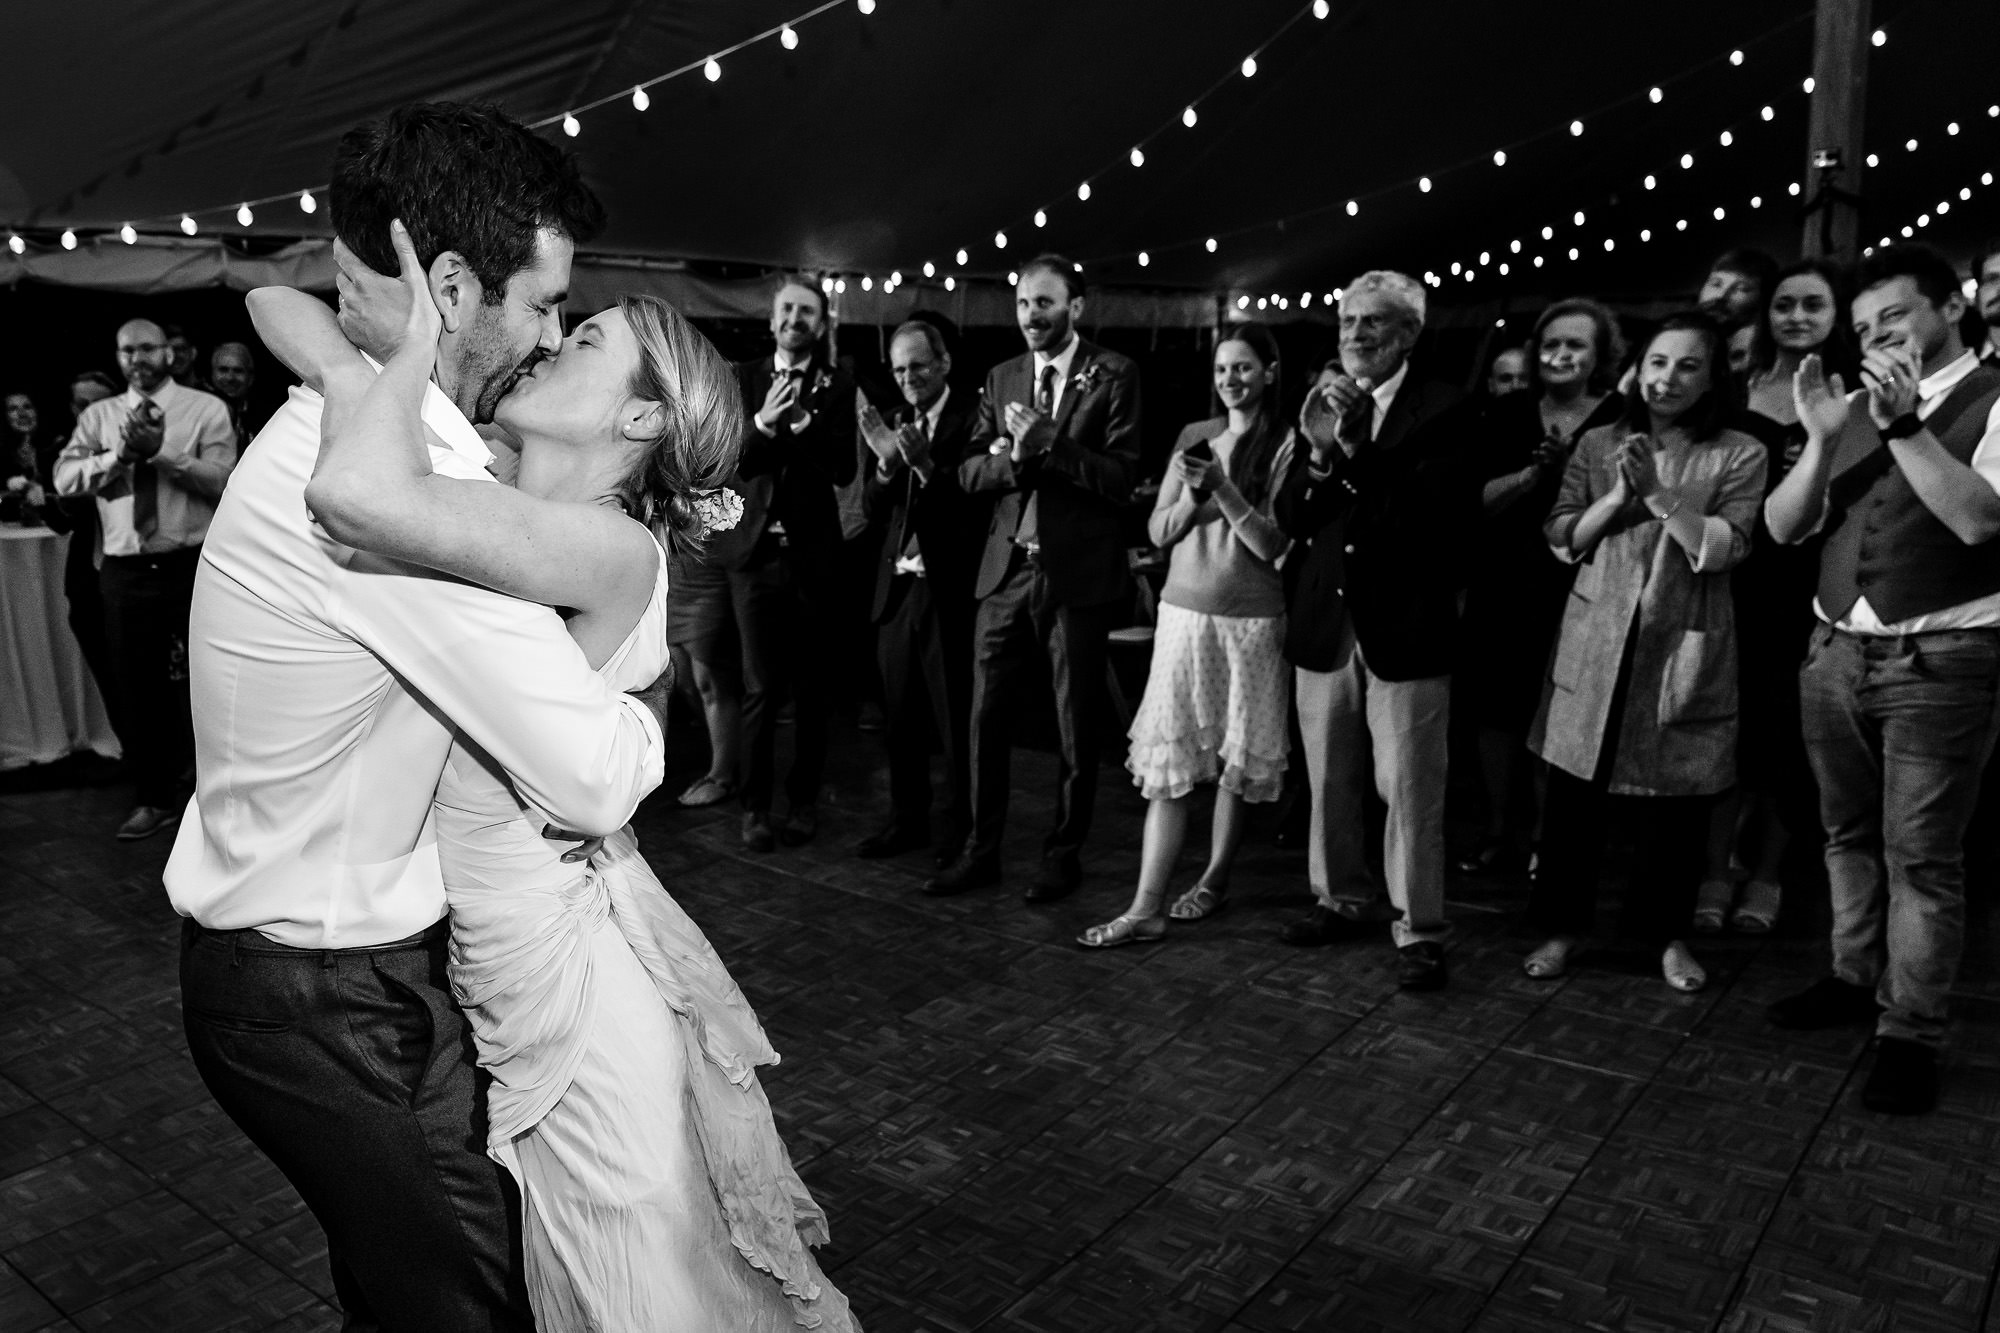 A wedding couple kiss on the dance floor while their family and friends clap.